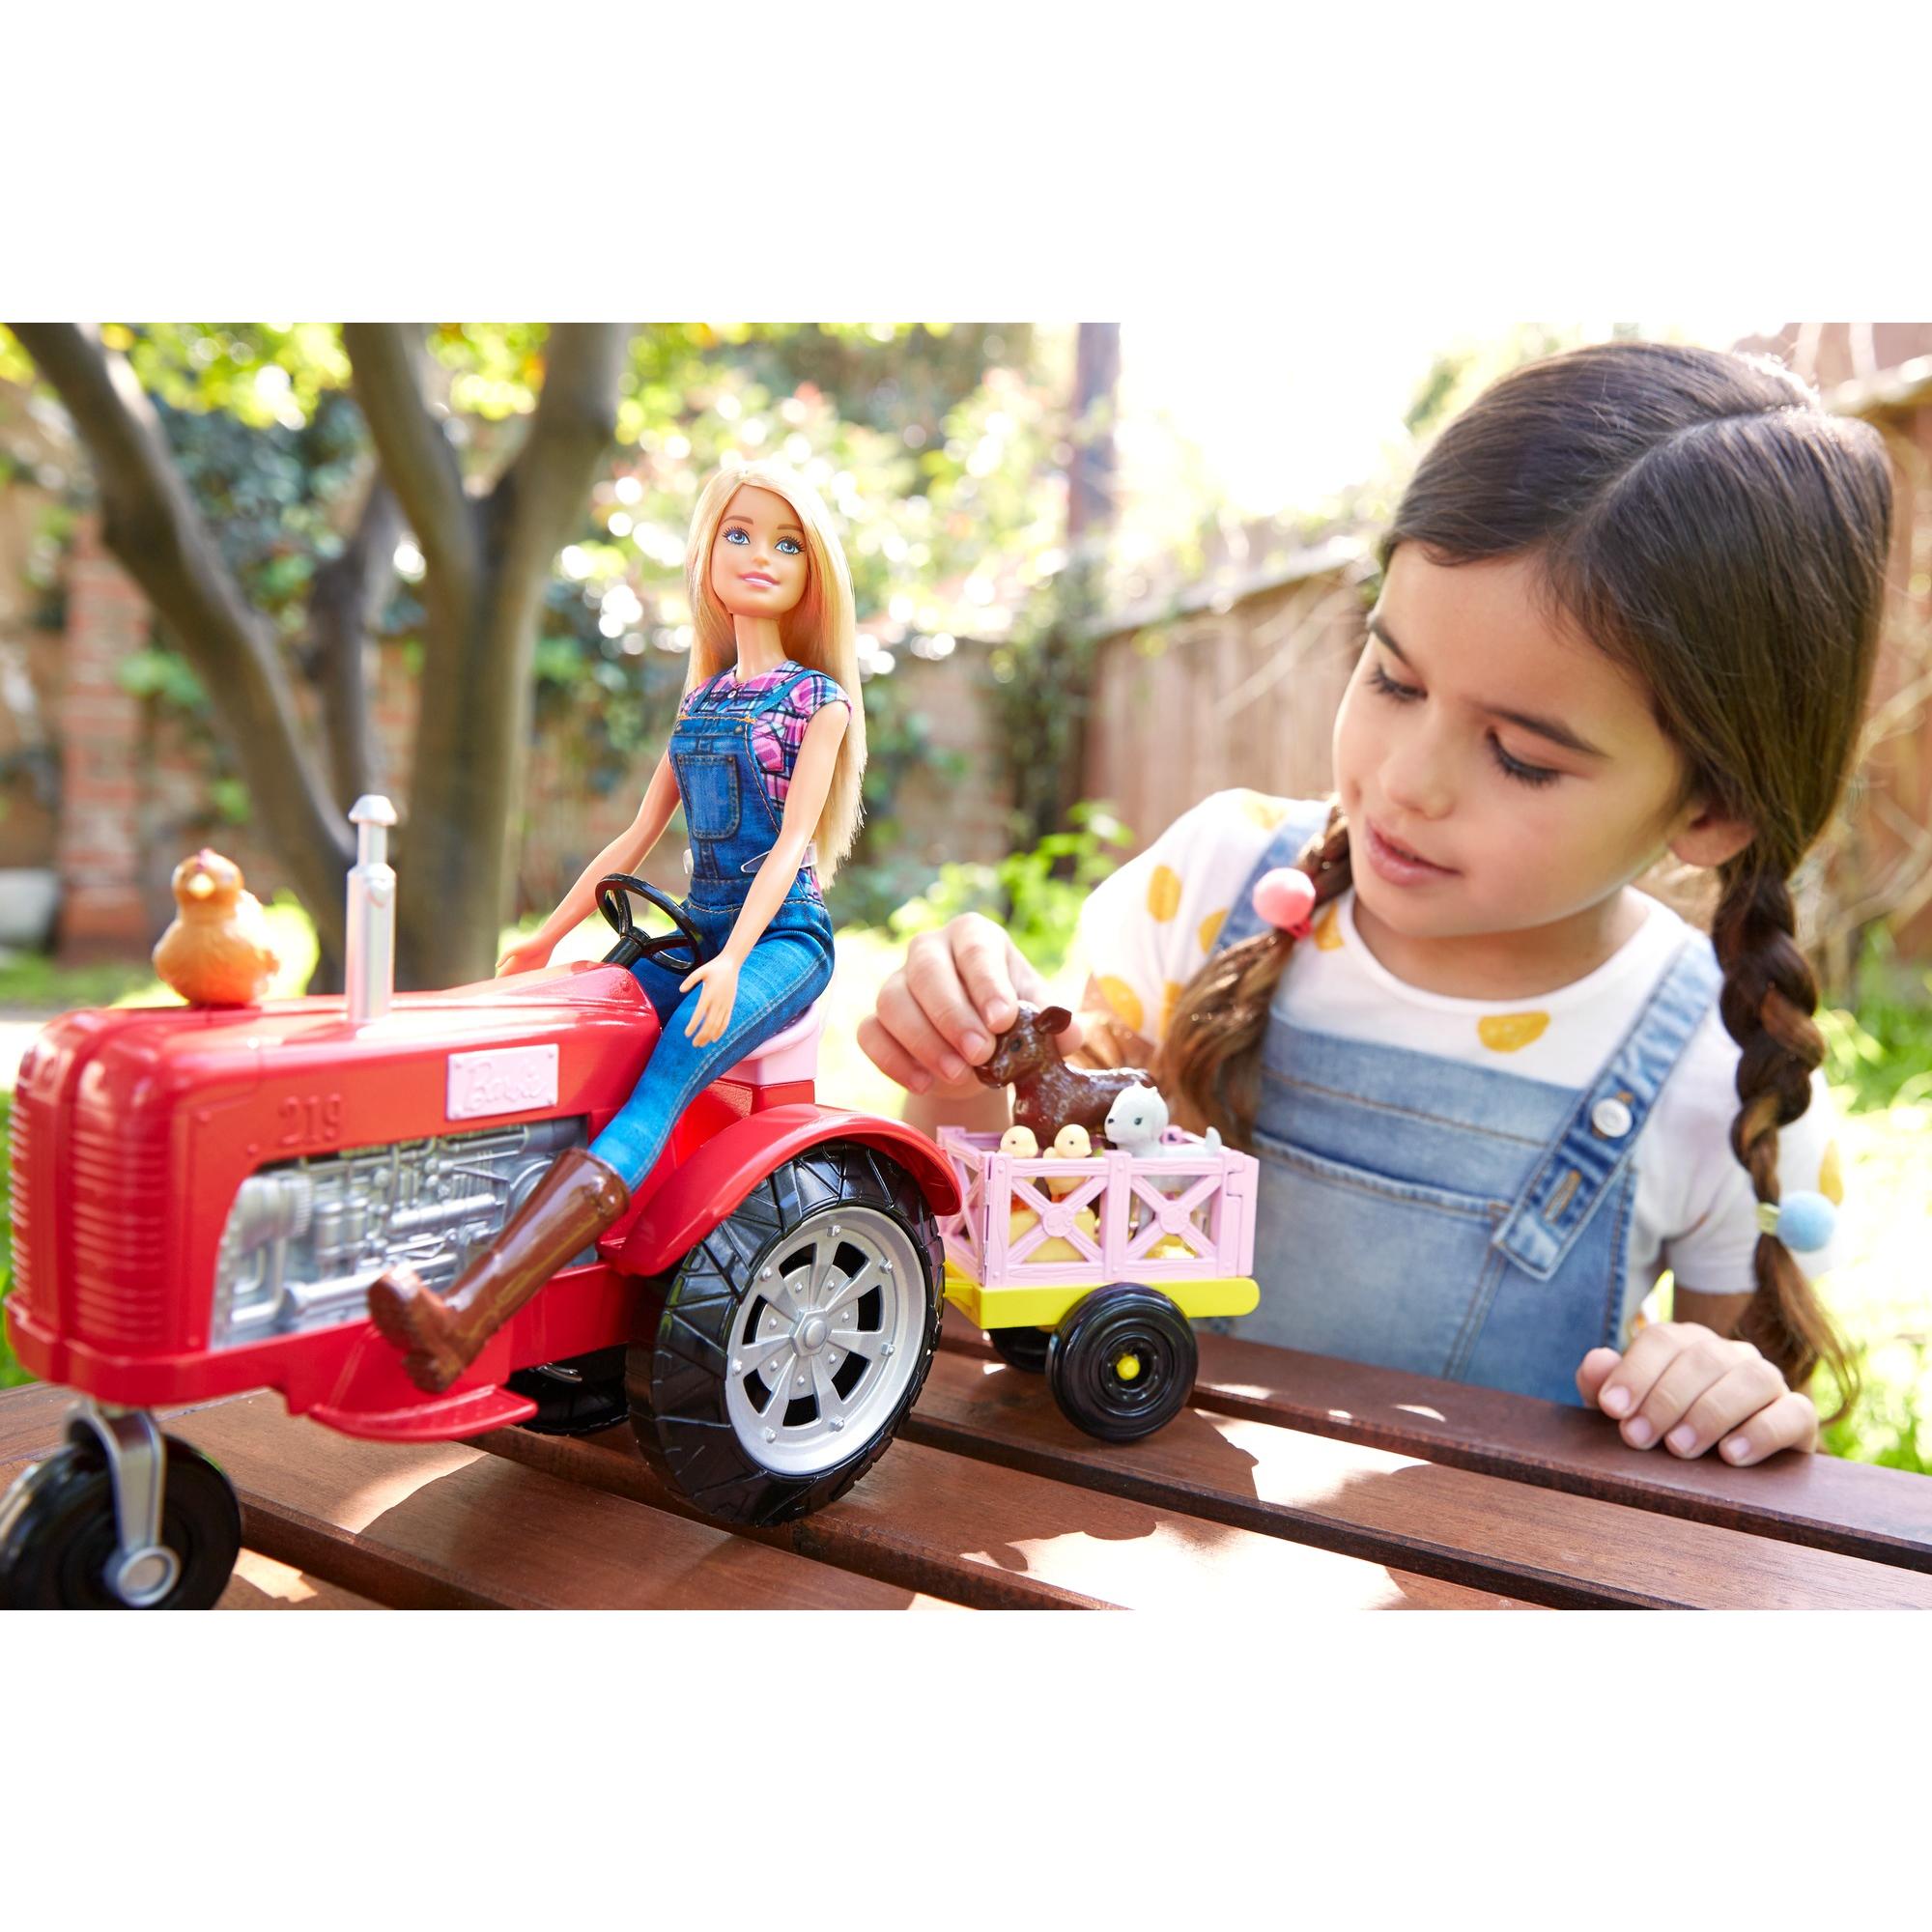 Barbie Careers Farmer Doll and Tractor with Themed Accessories - image 2 of 12